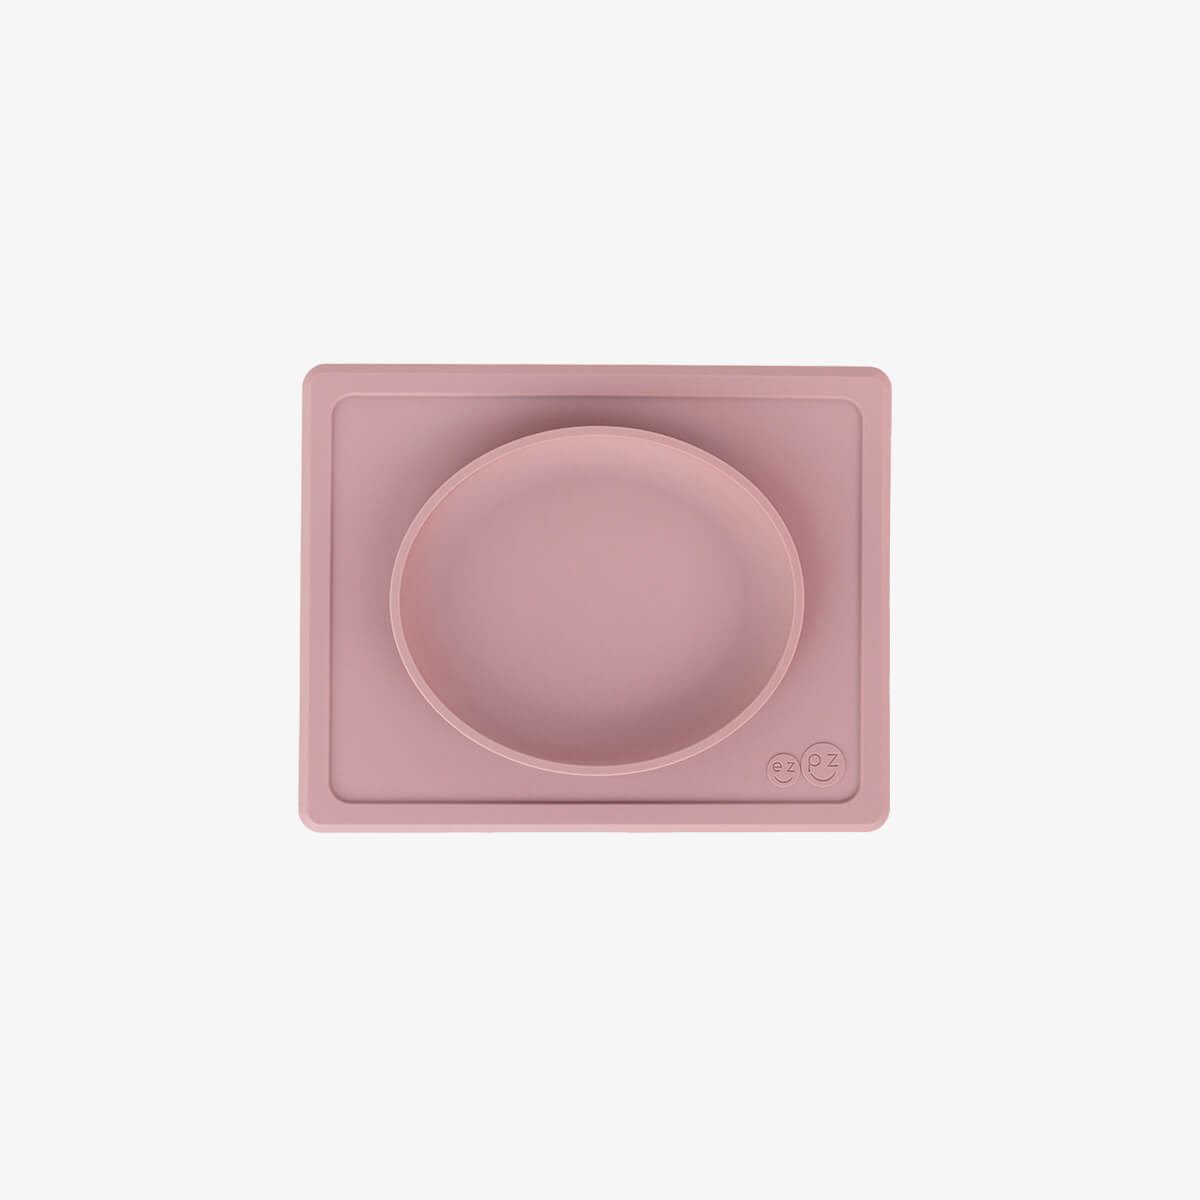 ezpz tiny plate in blush pink / silicone plate for babies that suctions to the highchair